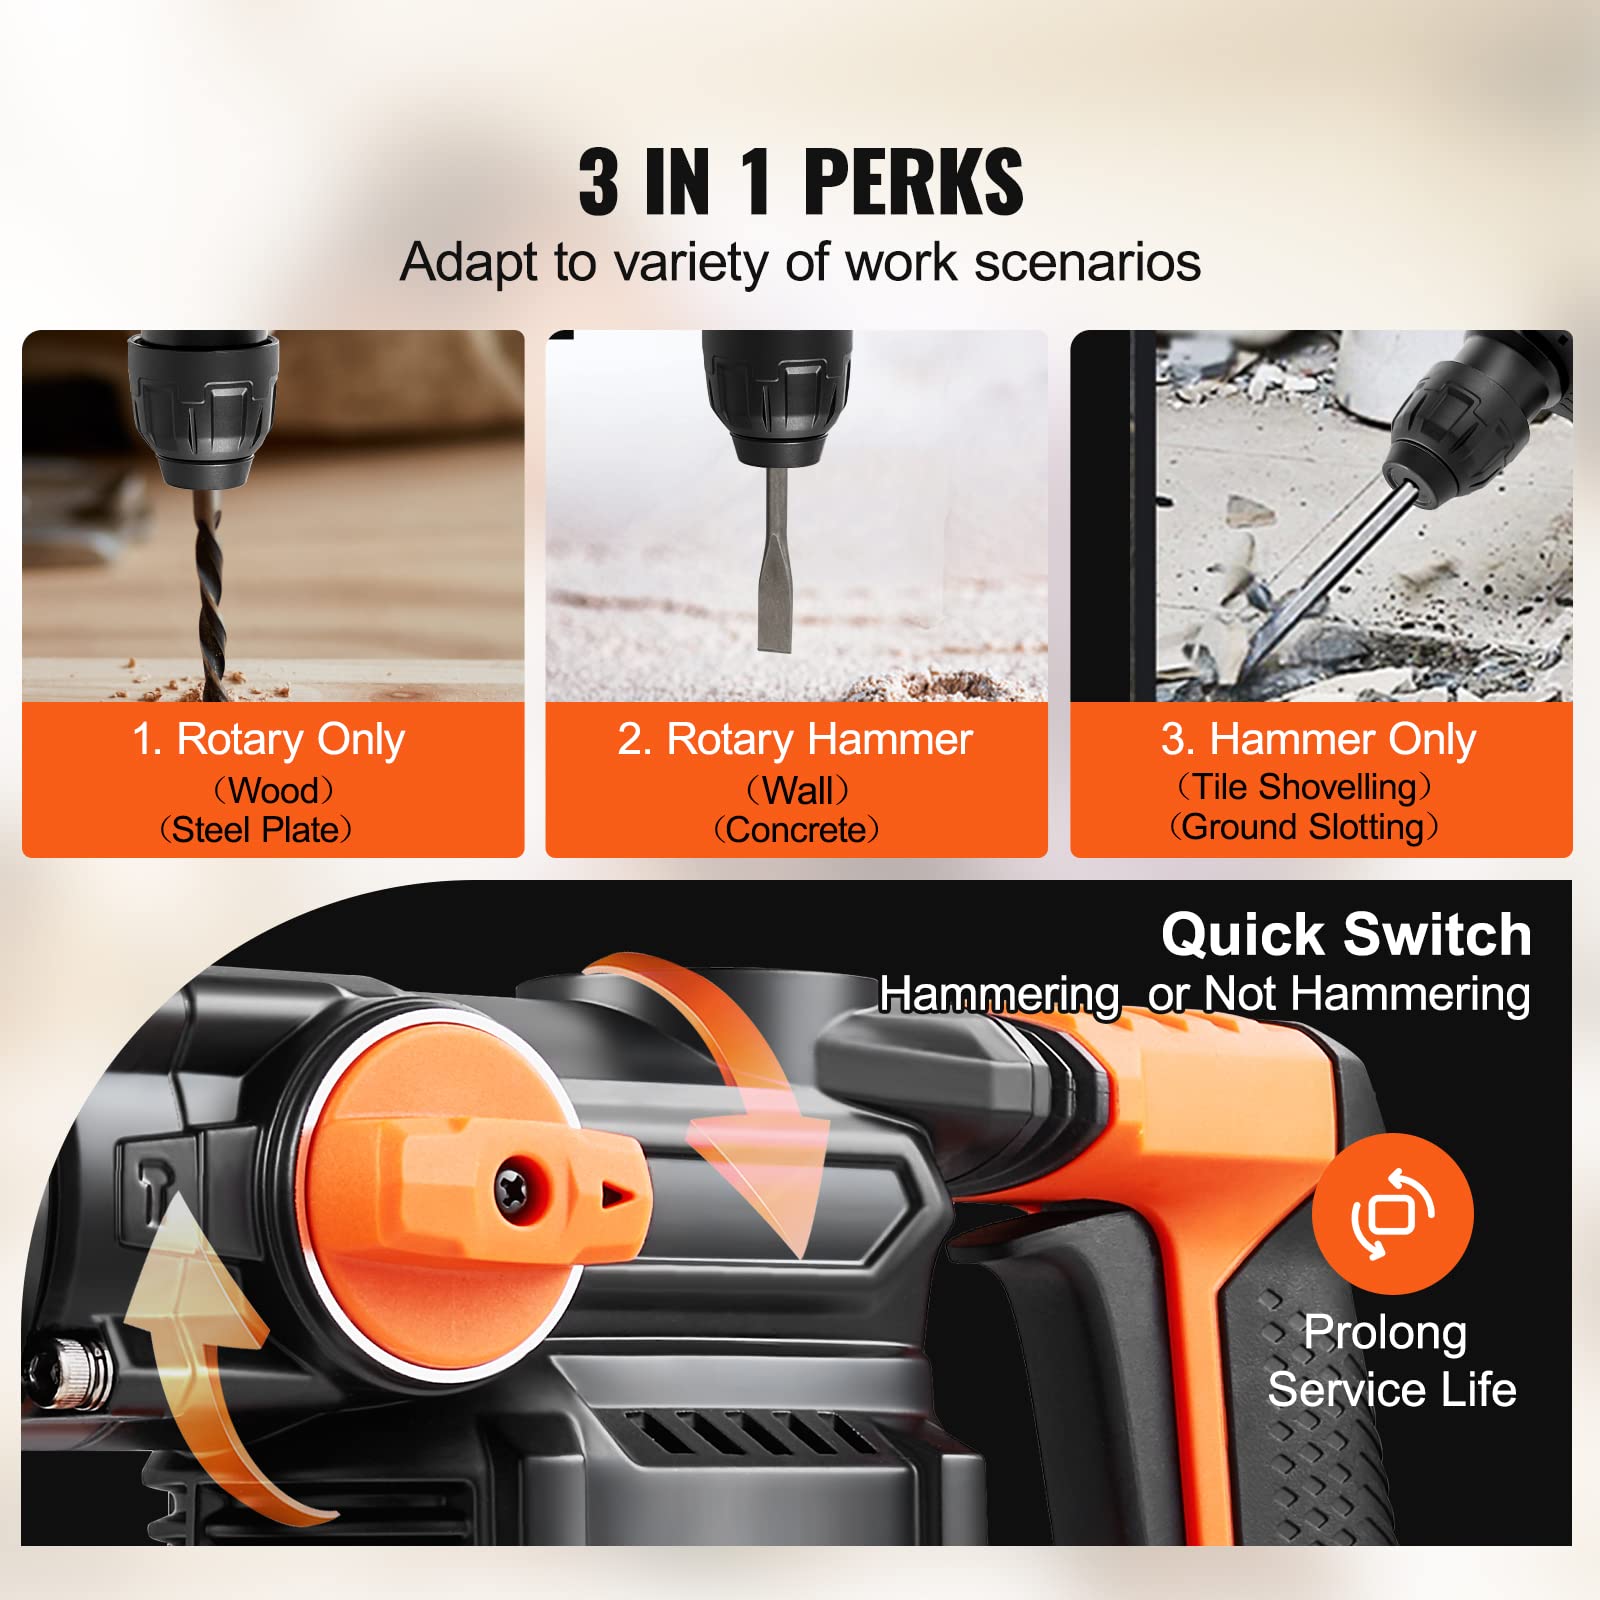 VEVOR 1 Inch SDS-Plus Rotary Hammer Drill, 20V 32Amp Cordless Drills, 3 Functions Electric Demolition Hammer, Chipping Hammers w/Vibration Control & Safety Clutch, Power Tool For Concrete Complete Kit